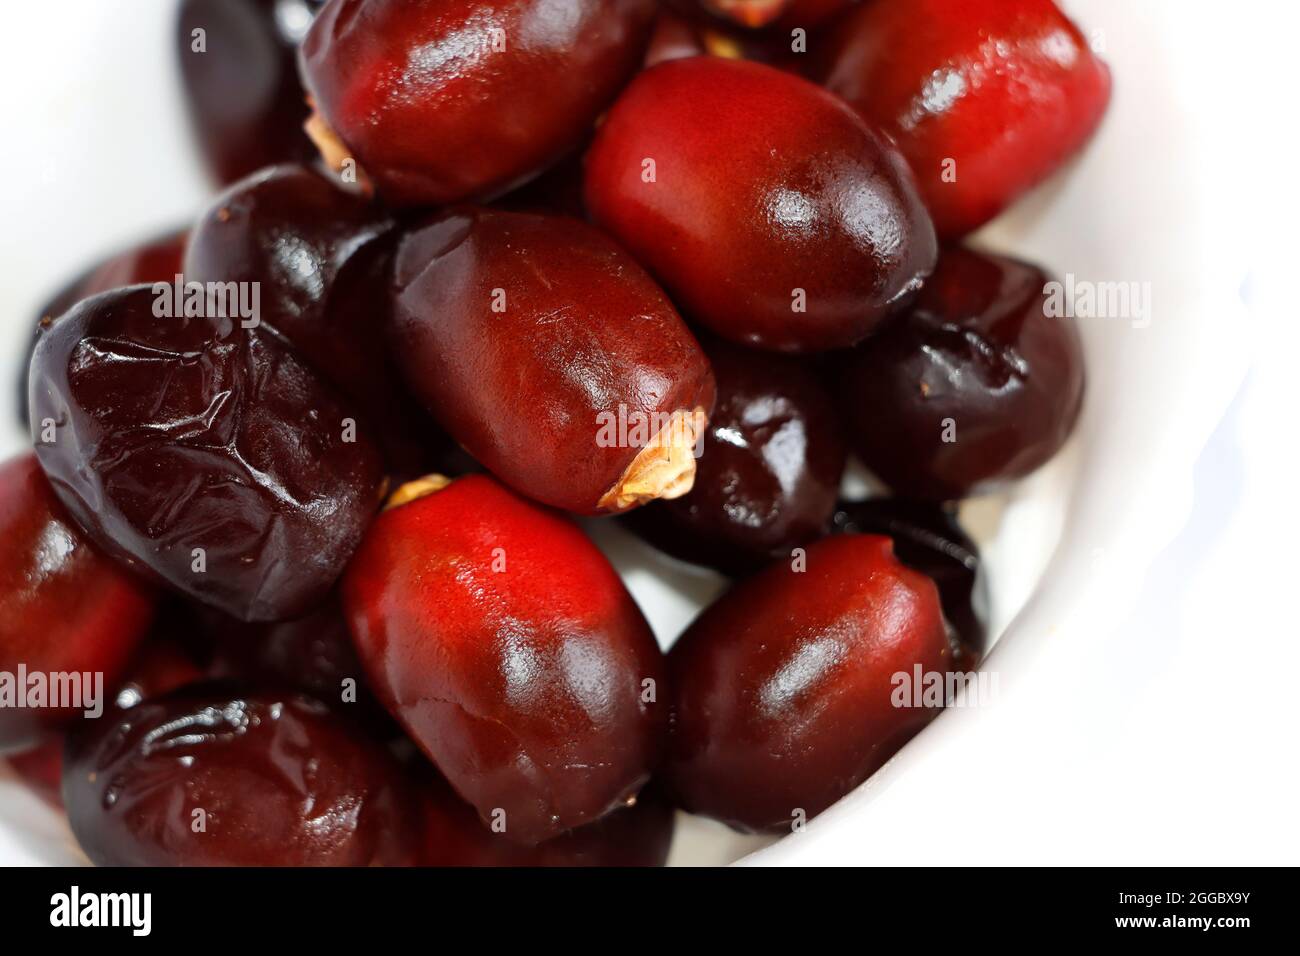 Closeup Image Of Arabic Dark Red Date Palm Fruits In White Background. Selective Focus Stock Photo